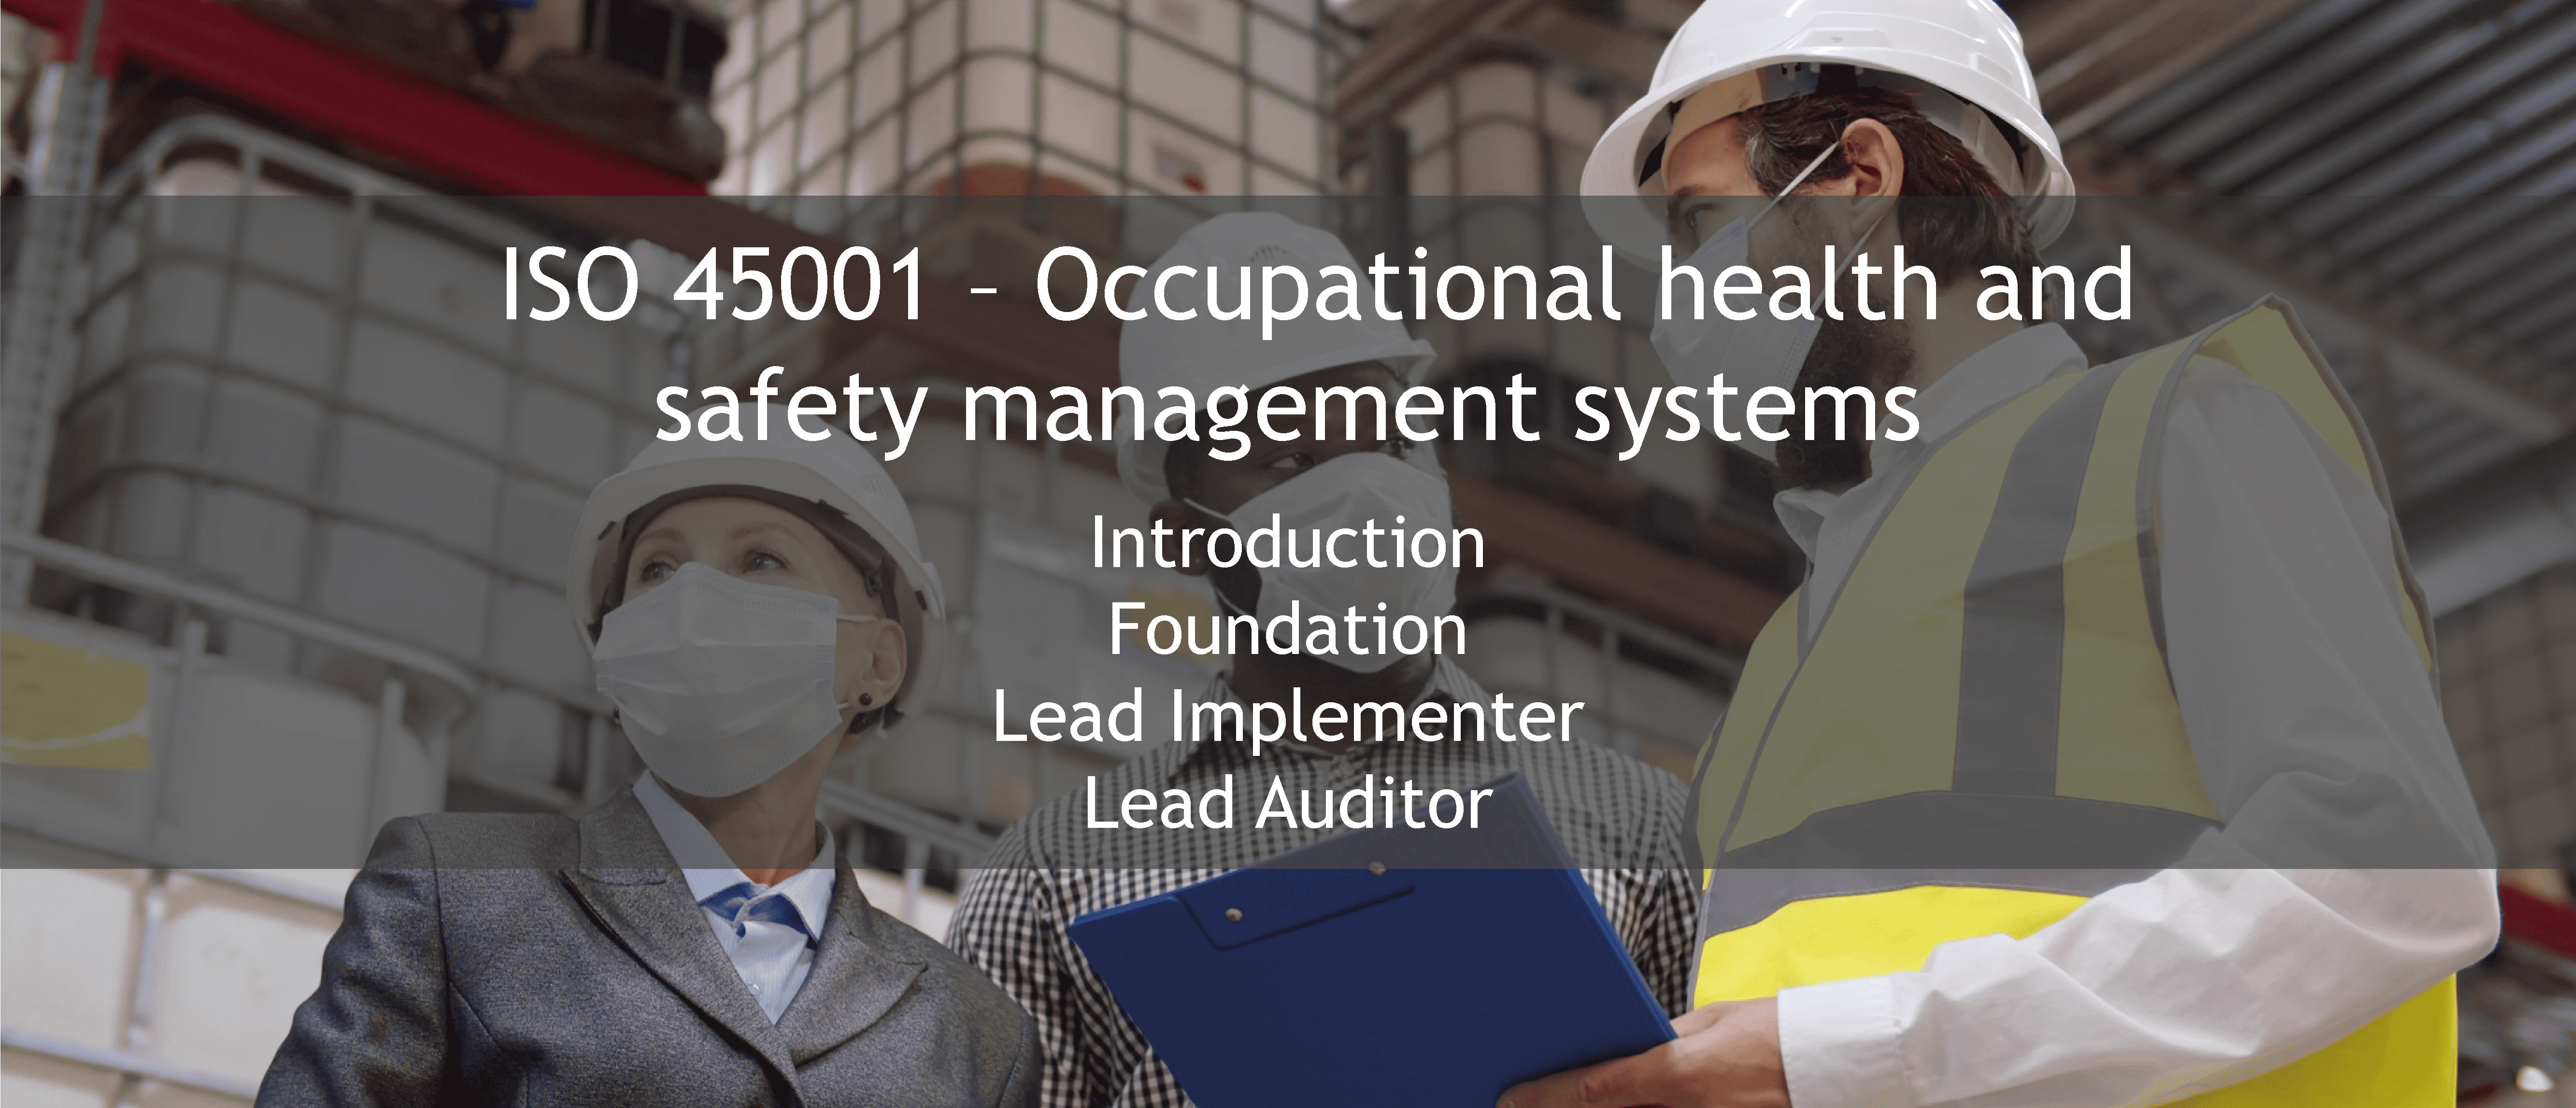 ISO 45001 training offer - ISO 37101 Management Systems for Sustainable Development in Communities